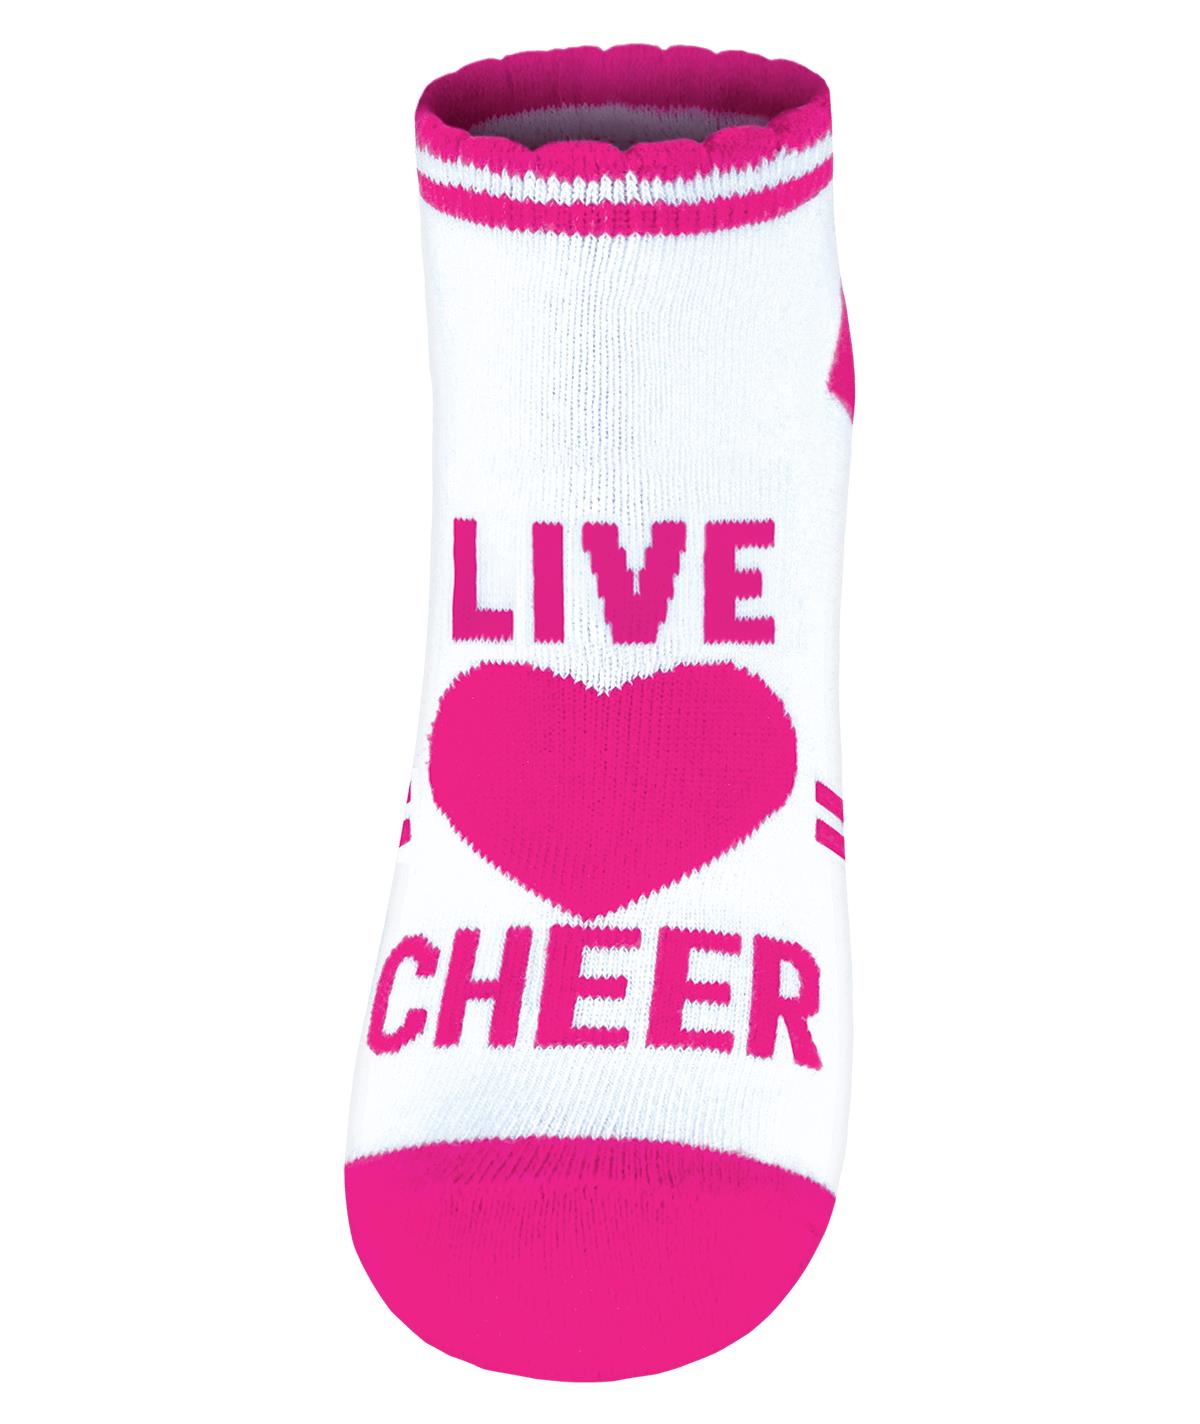 Chasse Cheer Heart Anklet